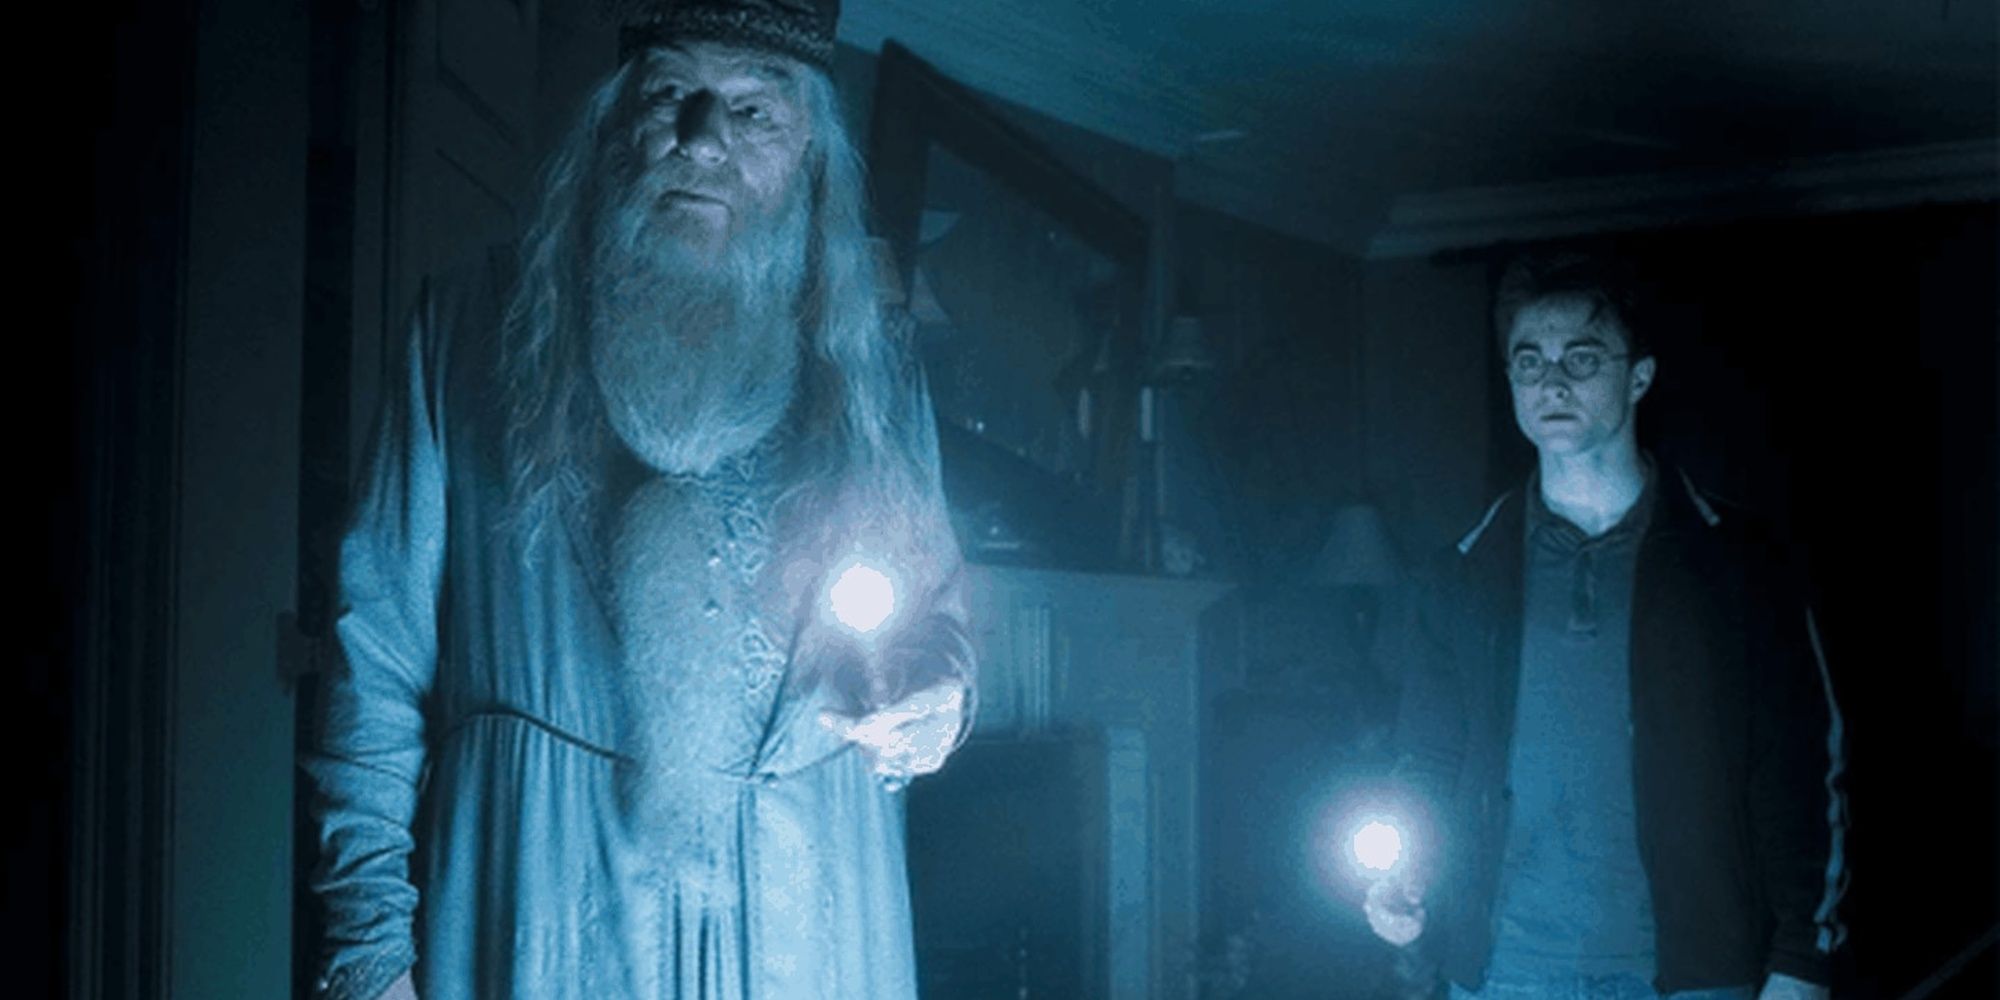 Harry Potter and Dumbledore searching a house with illuminated wands.